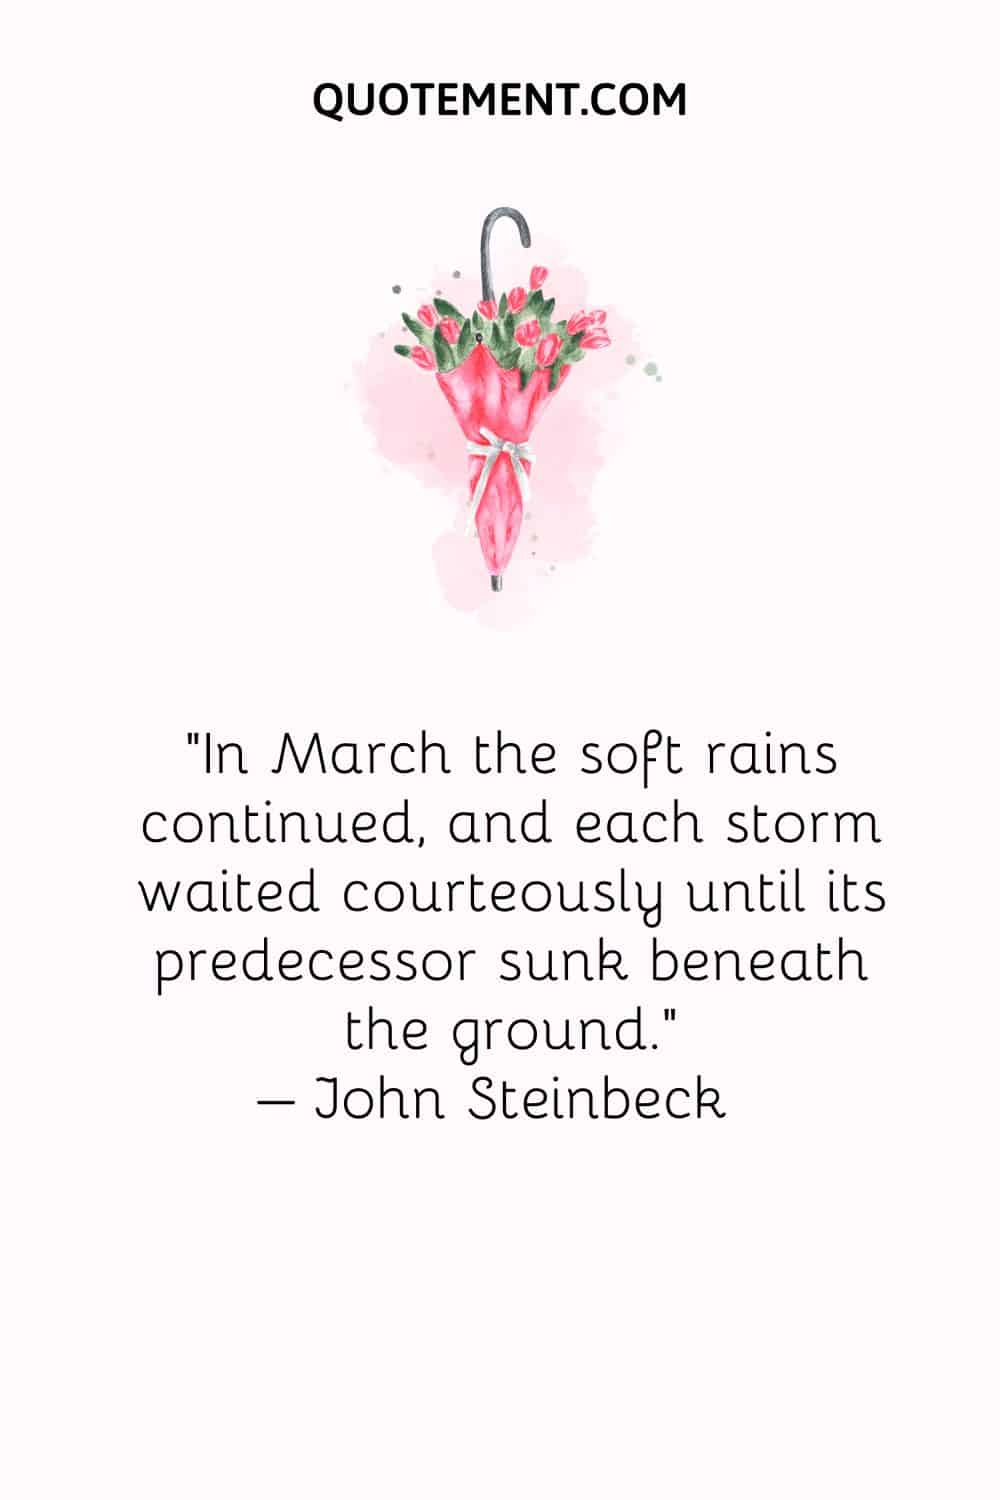 In March the soft rains continued, and each storm waited courteously until its predecessor sunk beneath the ground. – John Steinbeck